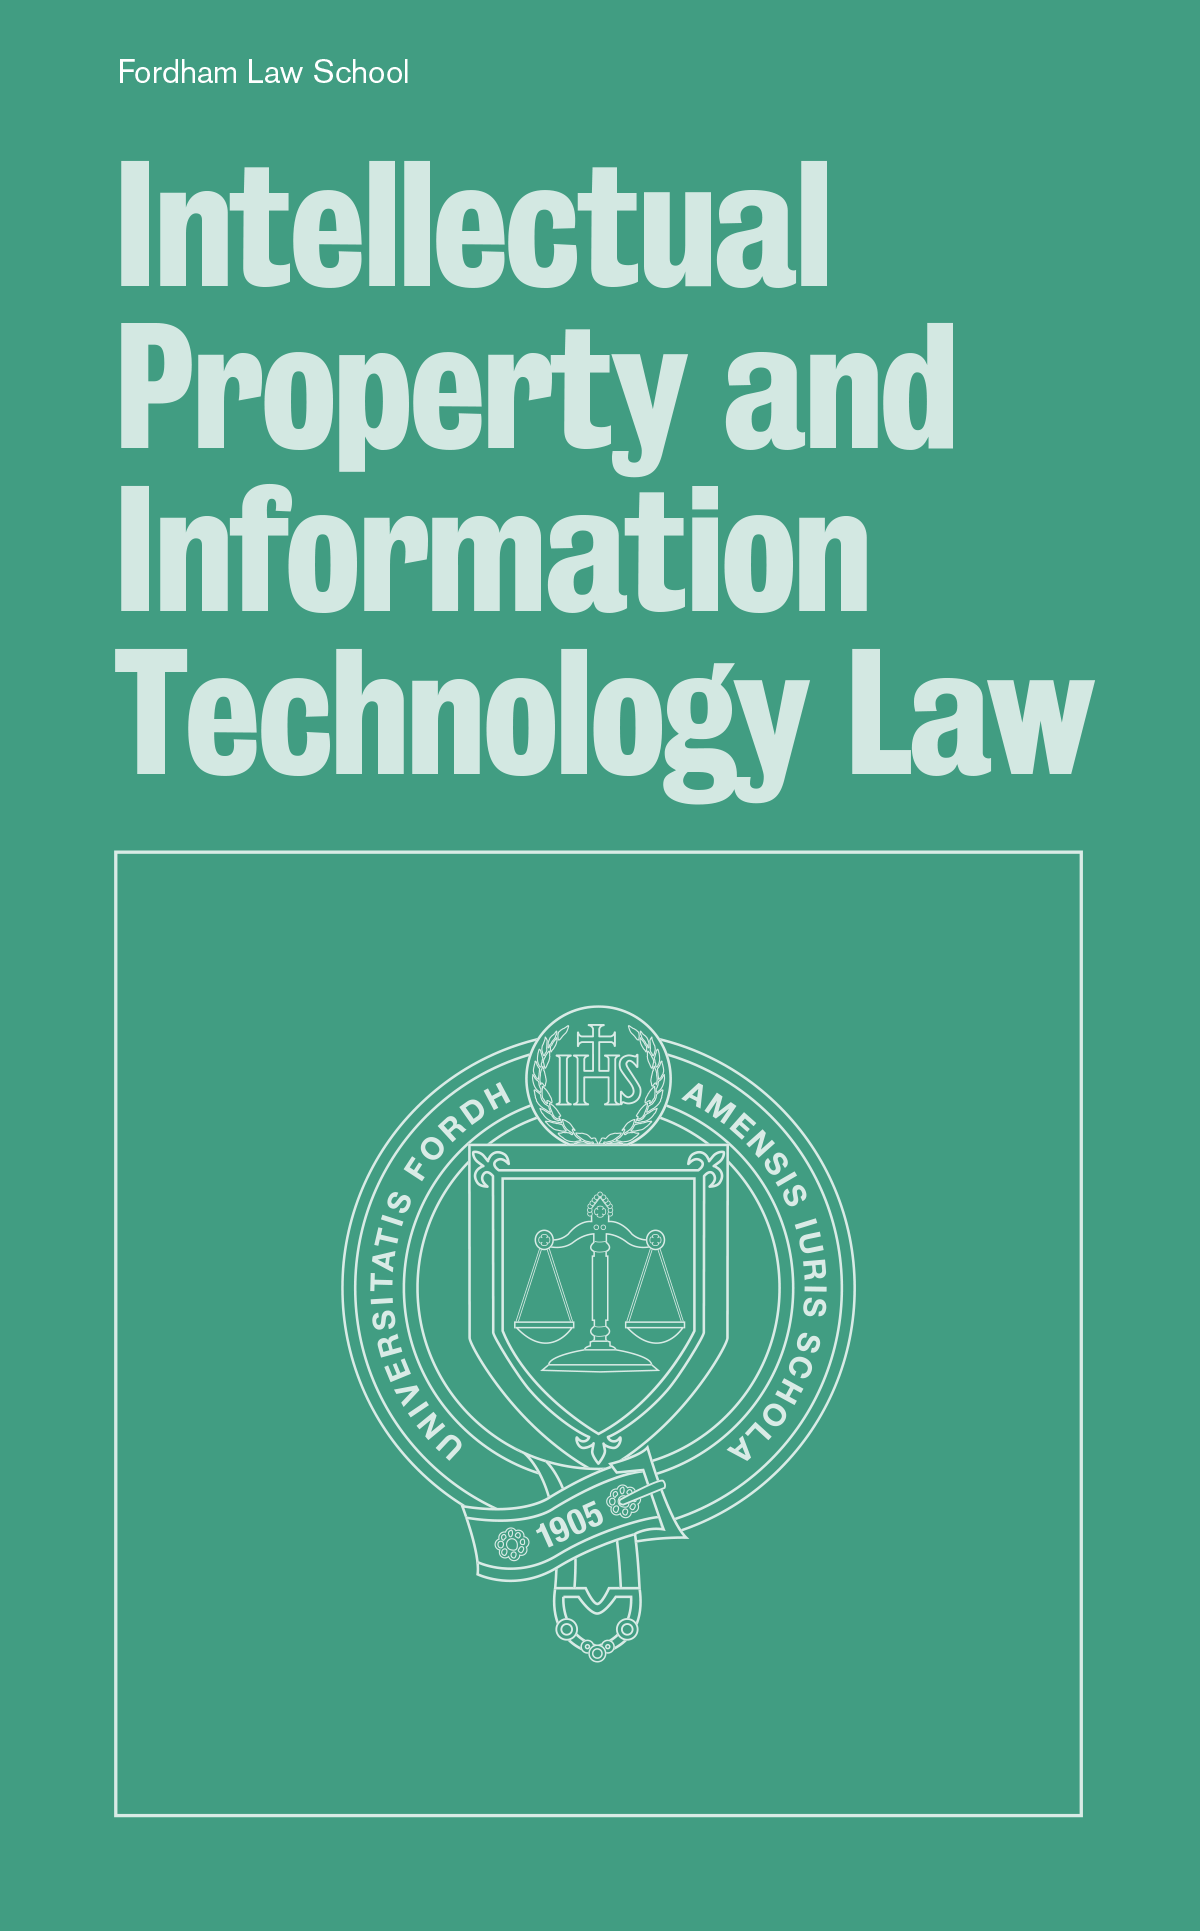 Intellectual Property and Information Technology Law brochure cover